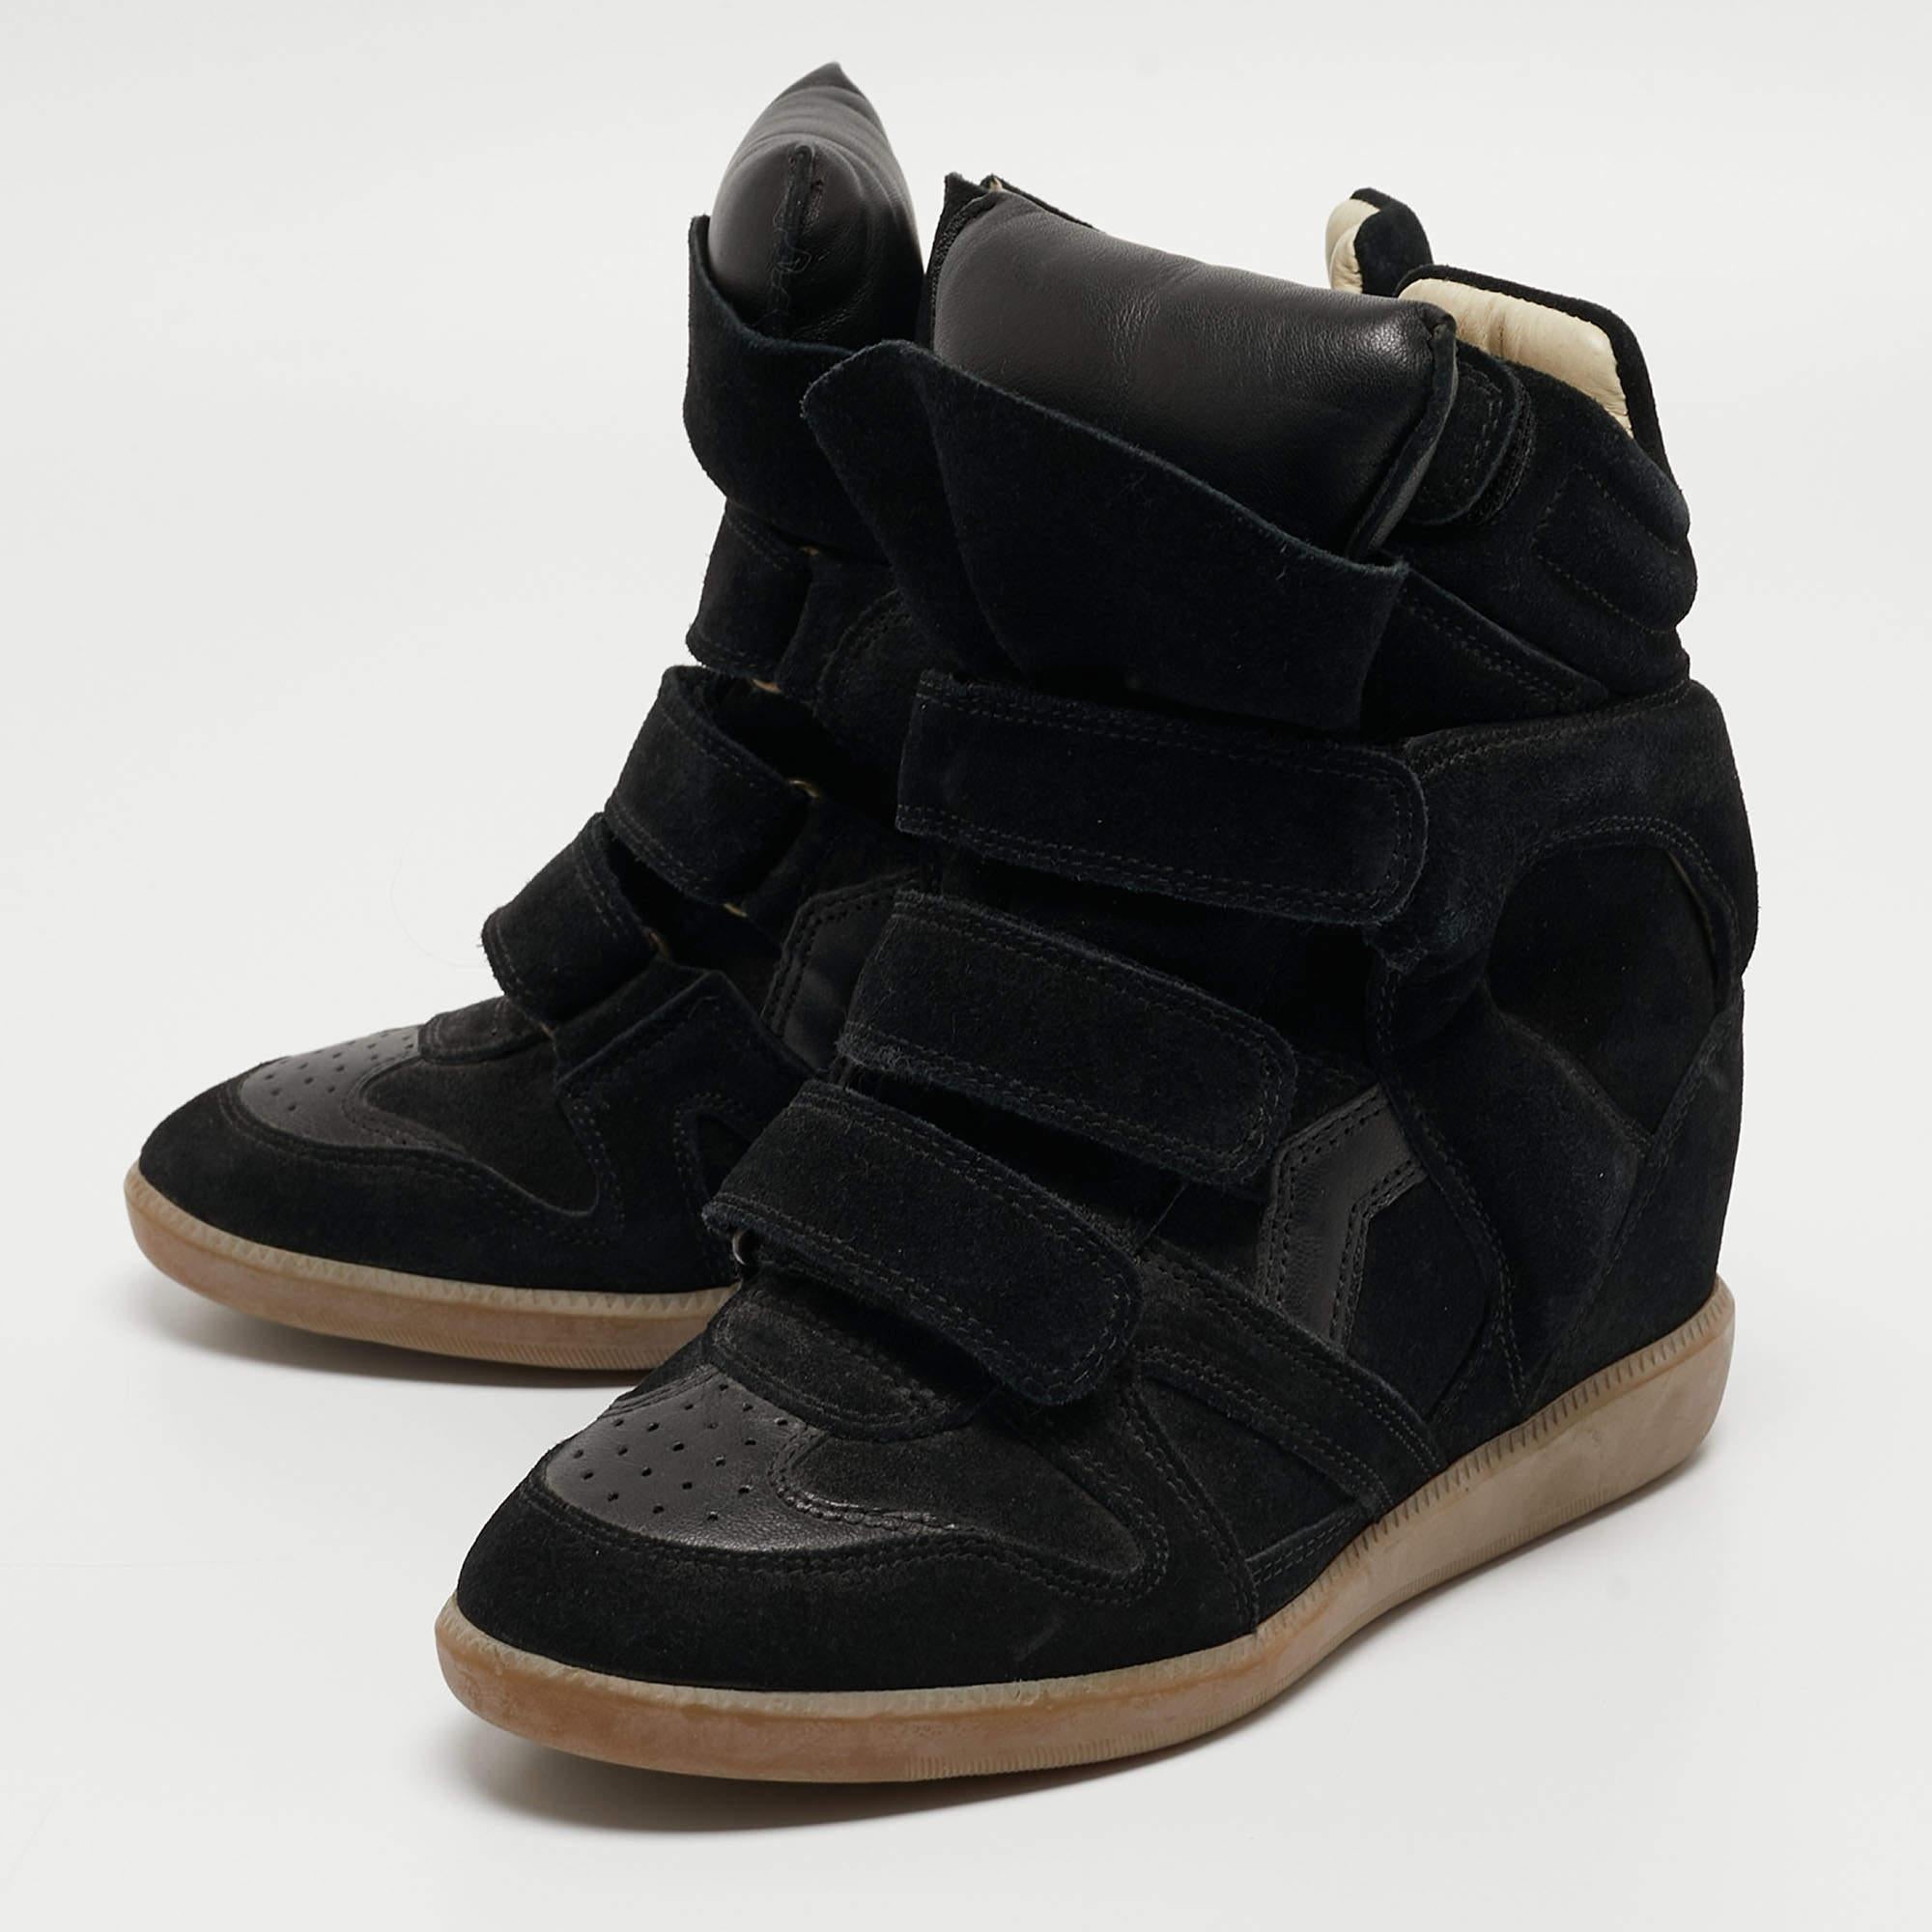 Isabel Marant Black Leather and Suede Wedge Sneakers Size 37 For Sale 1